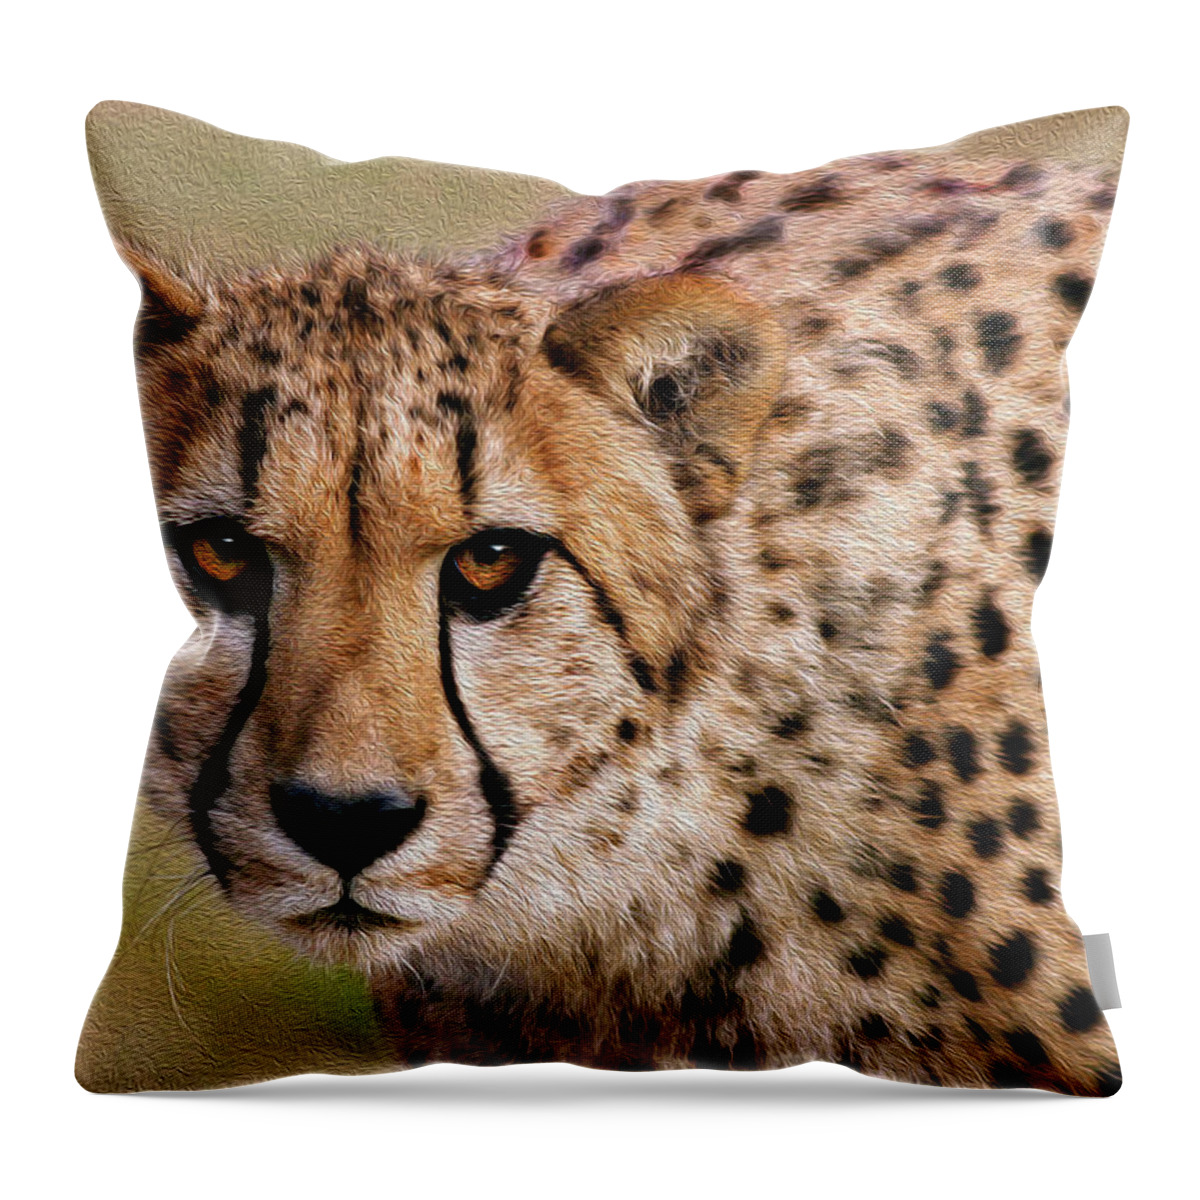 Cheetah Throw Pillow featuring the photograph Calculated Look by Art Cole